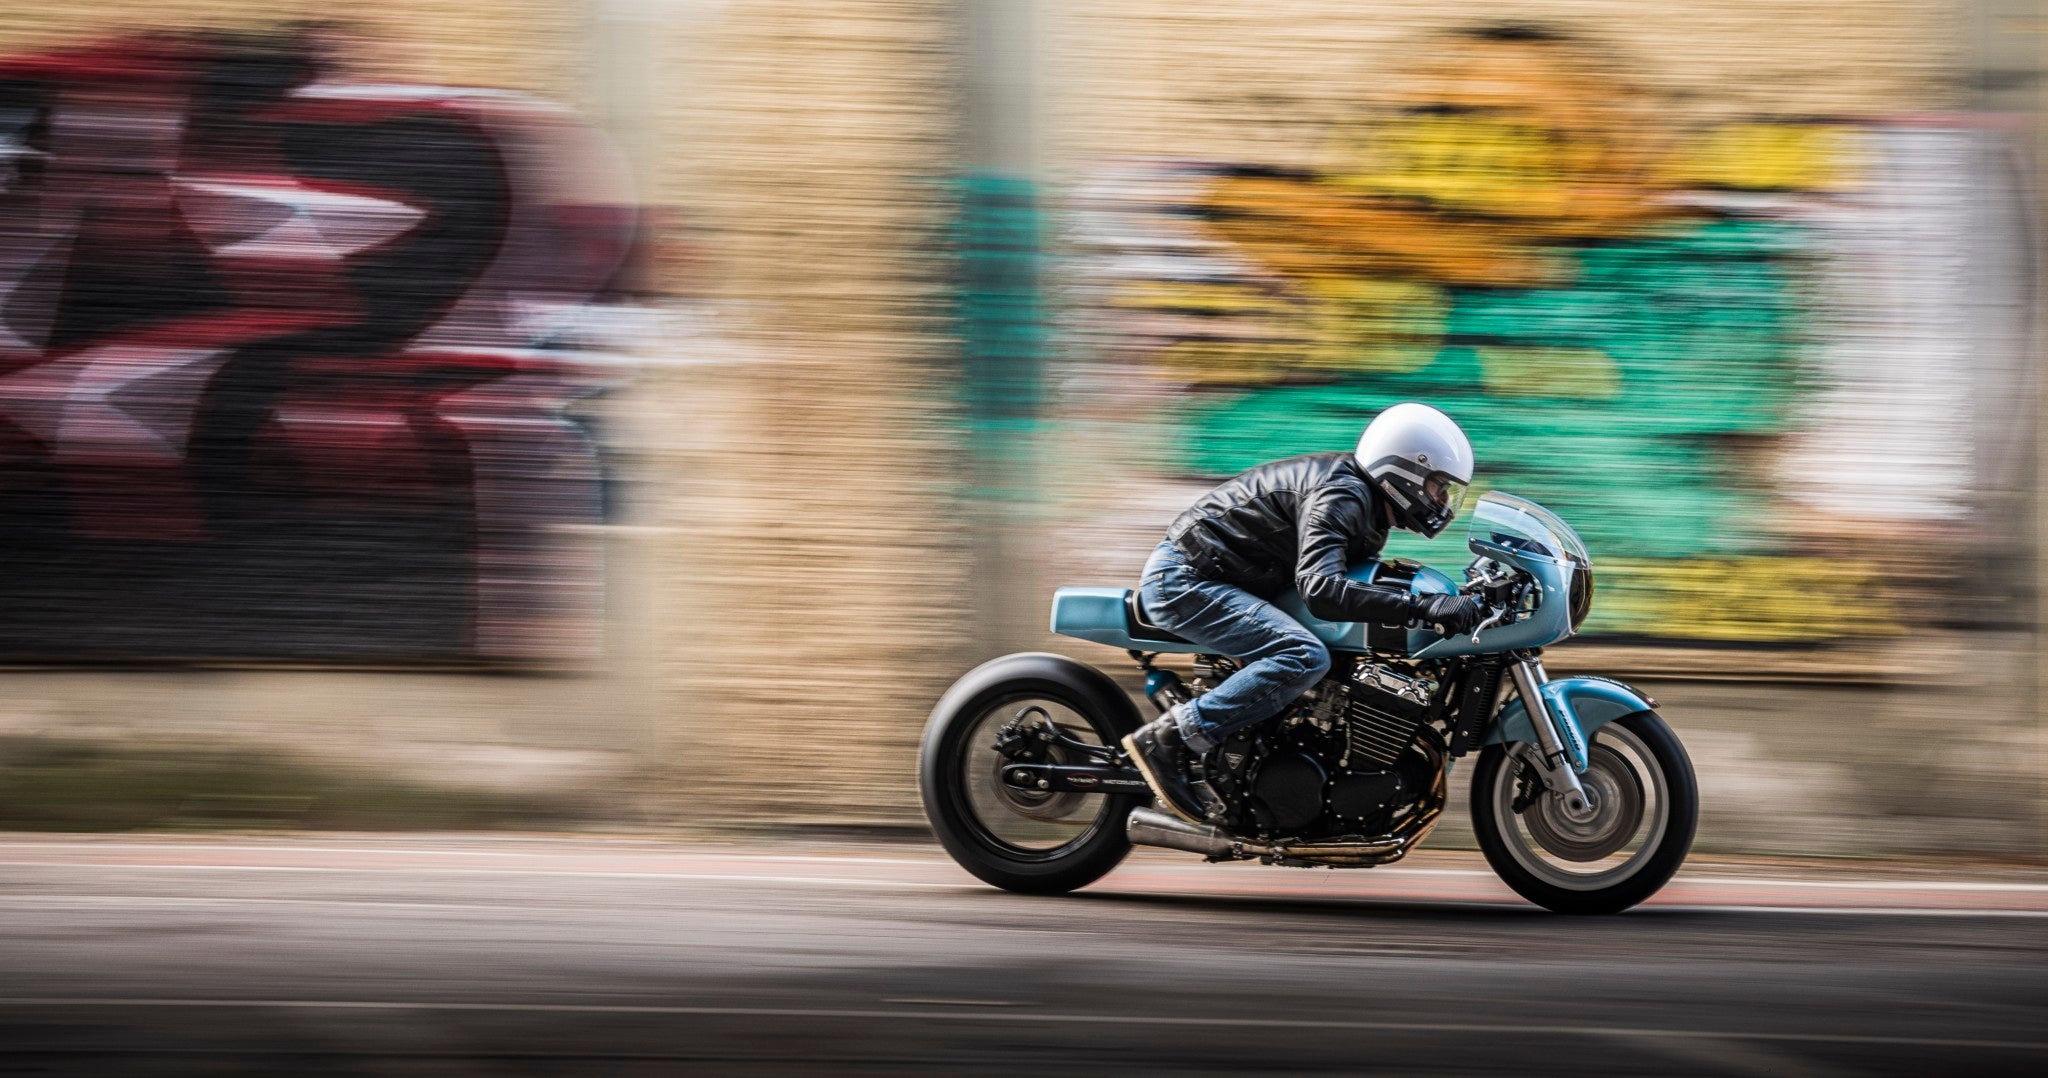 BOB THE BOOSTED – RETURN OF THE CAFE RACERS